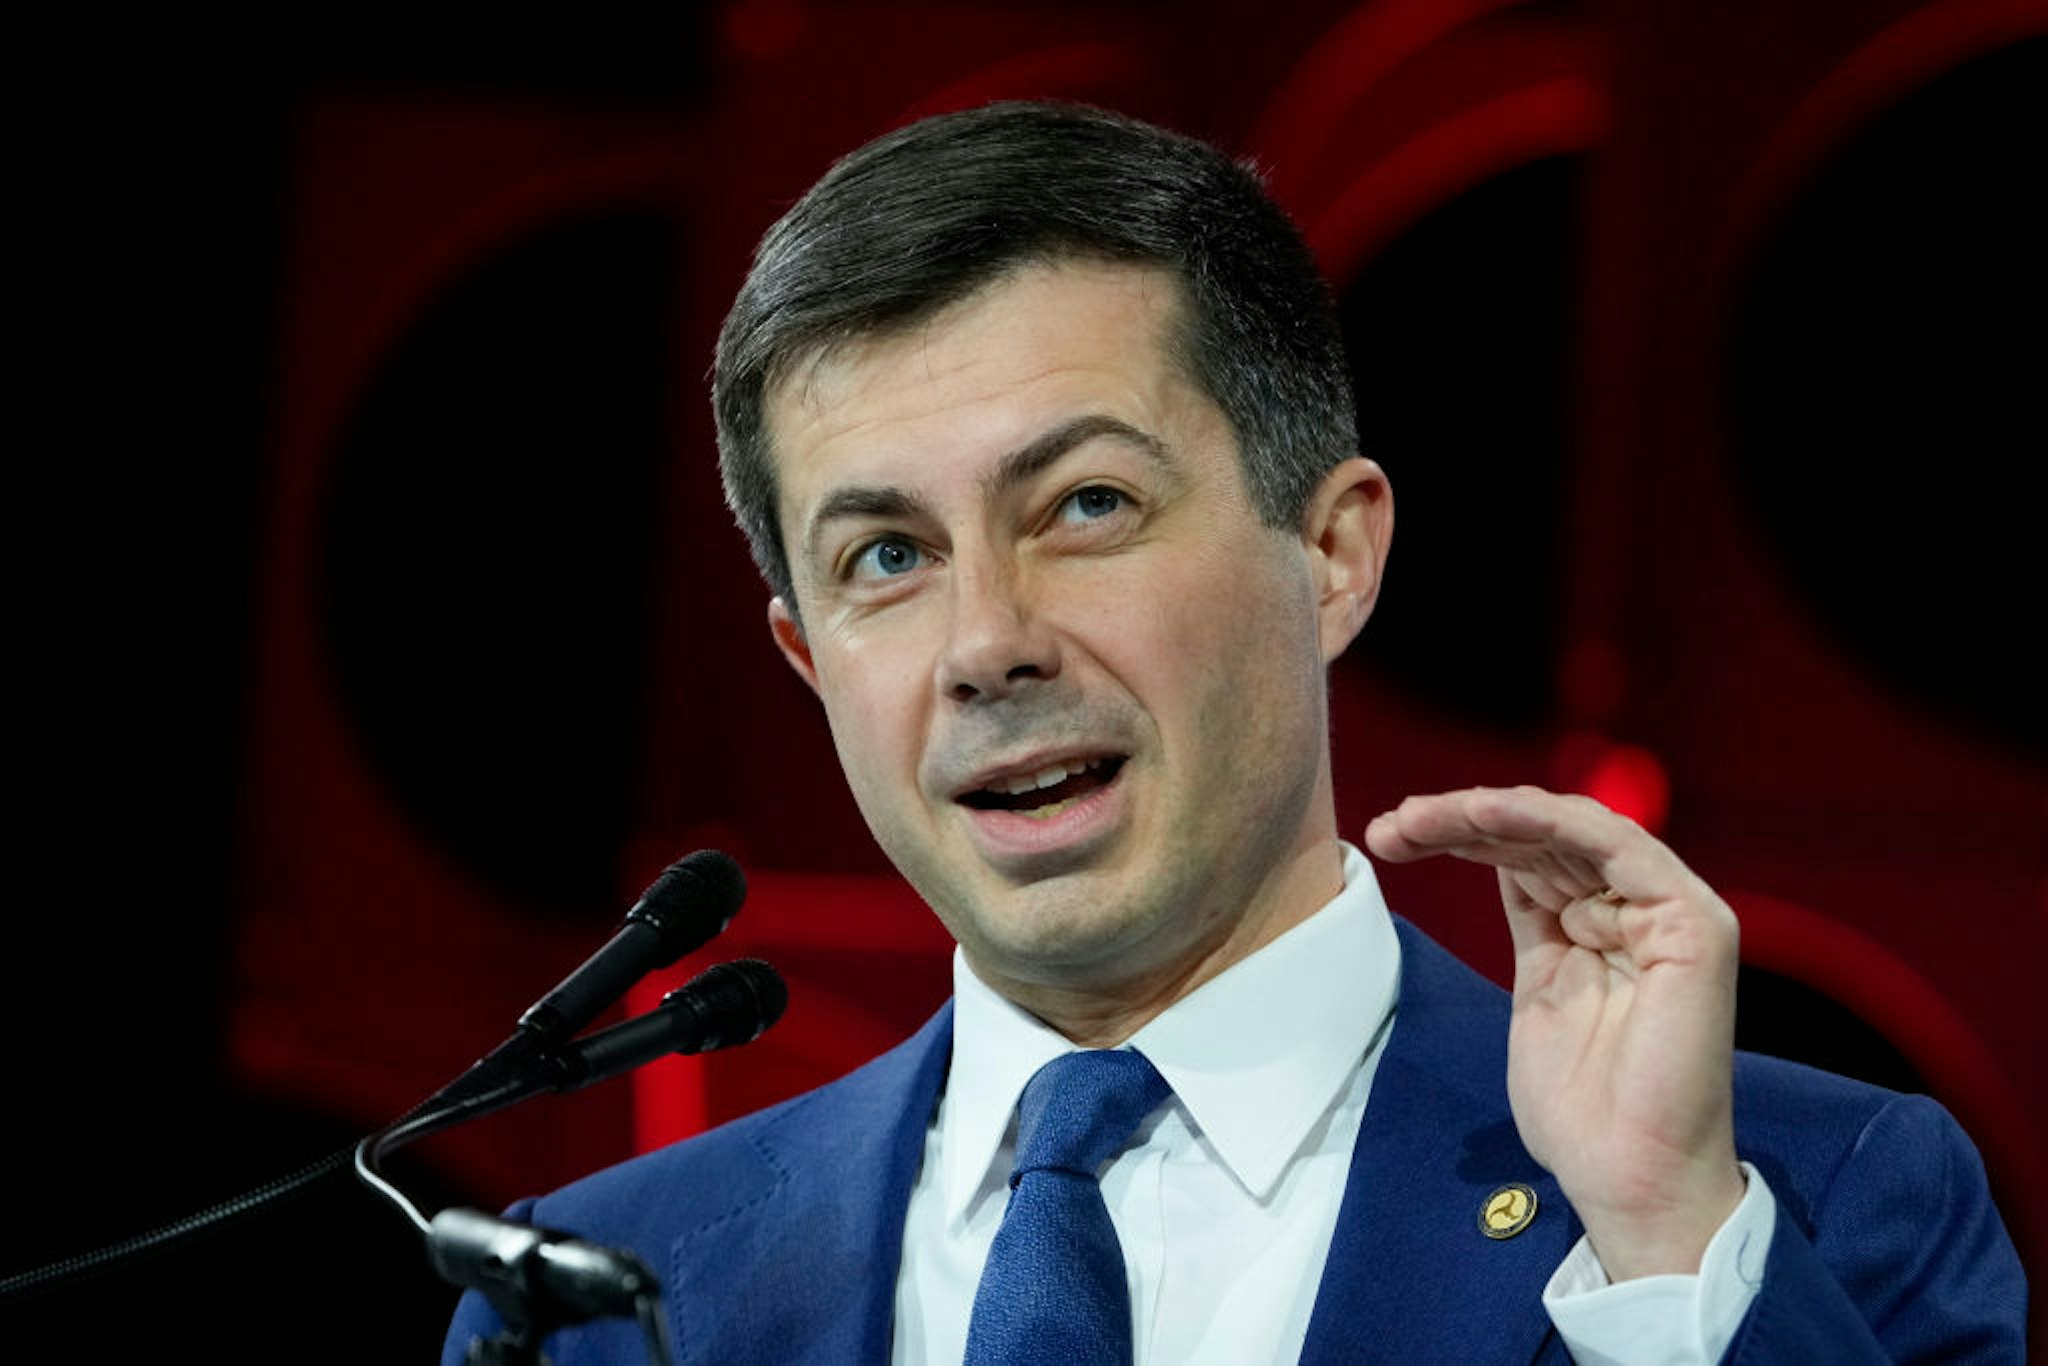 WASHINGTON, DC - JANUARY 20: U.S. Transportation Secretary Pete Buttigieg speaks during the United States Conference of Mayors 91st Winter Meeting January 20, 2023 in Washington, DC. The United States Conference of Mayors is the official non-partisan organization of cities with populations of 30,000 or more. This afternoon President Joe Biden will welcome mayors to the White House. (Photo by Drew Angerer/Getty Images)